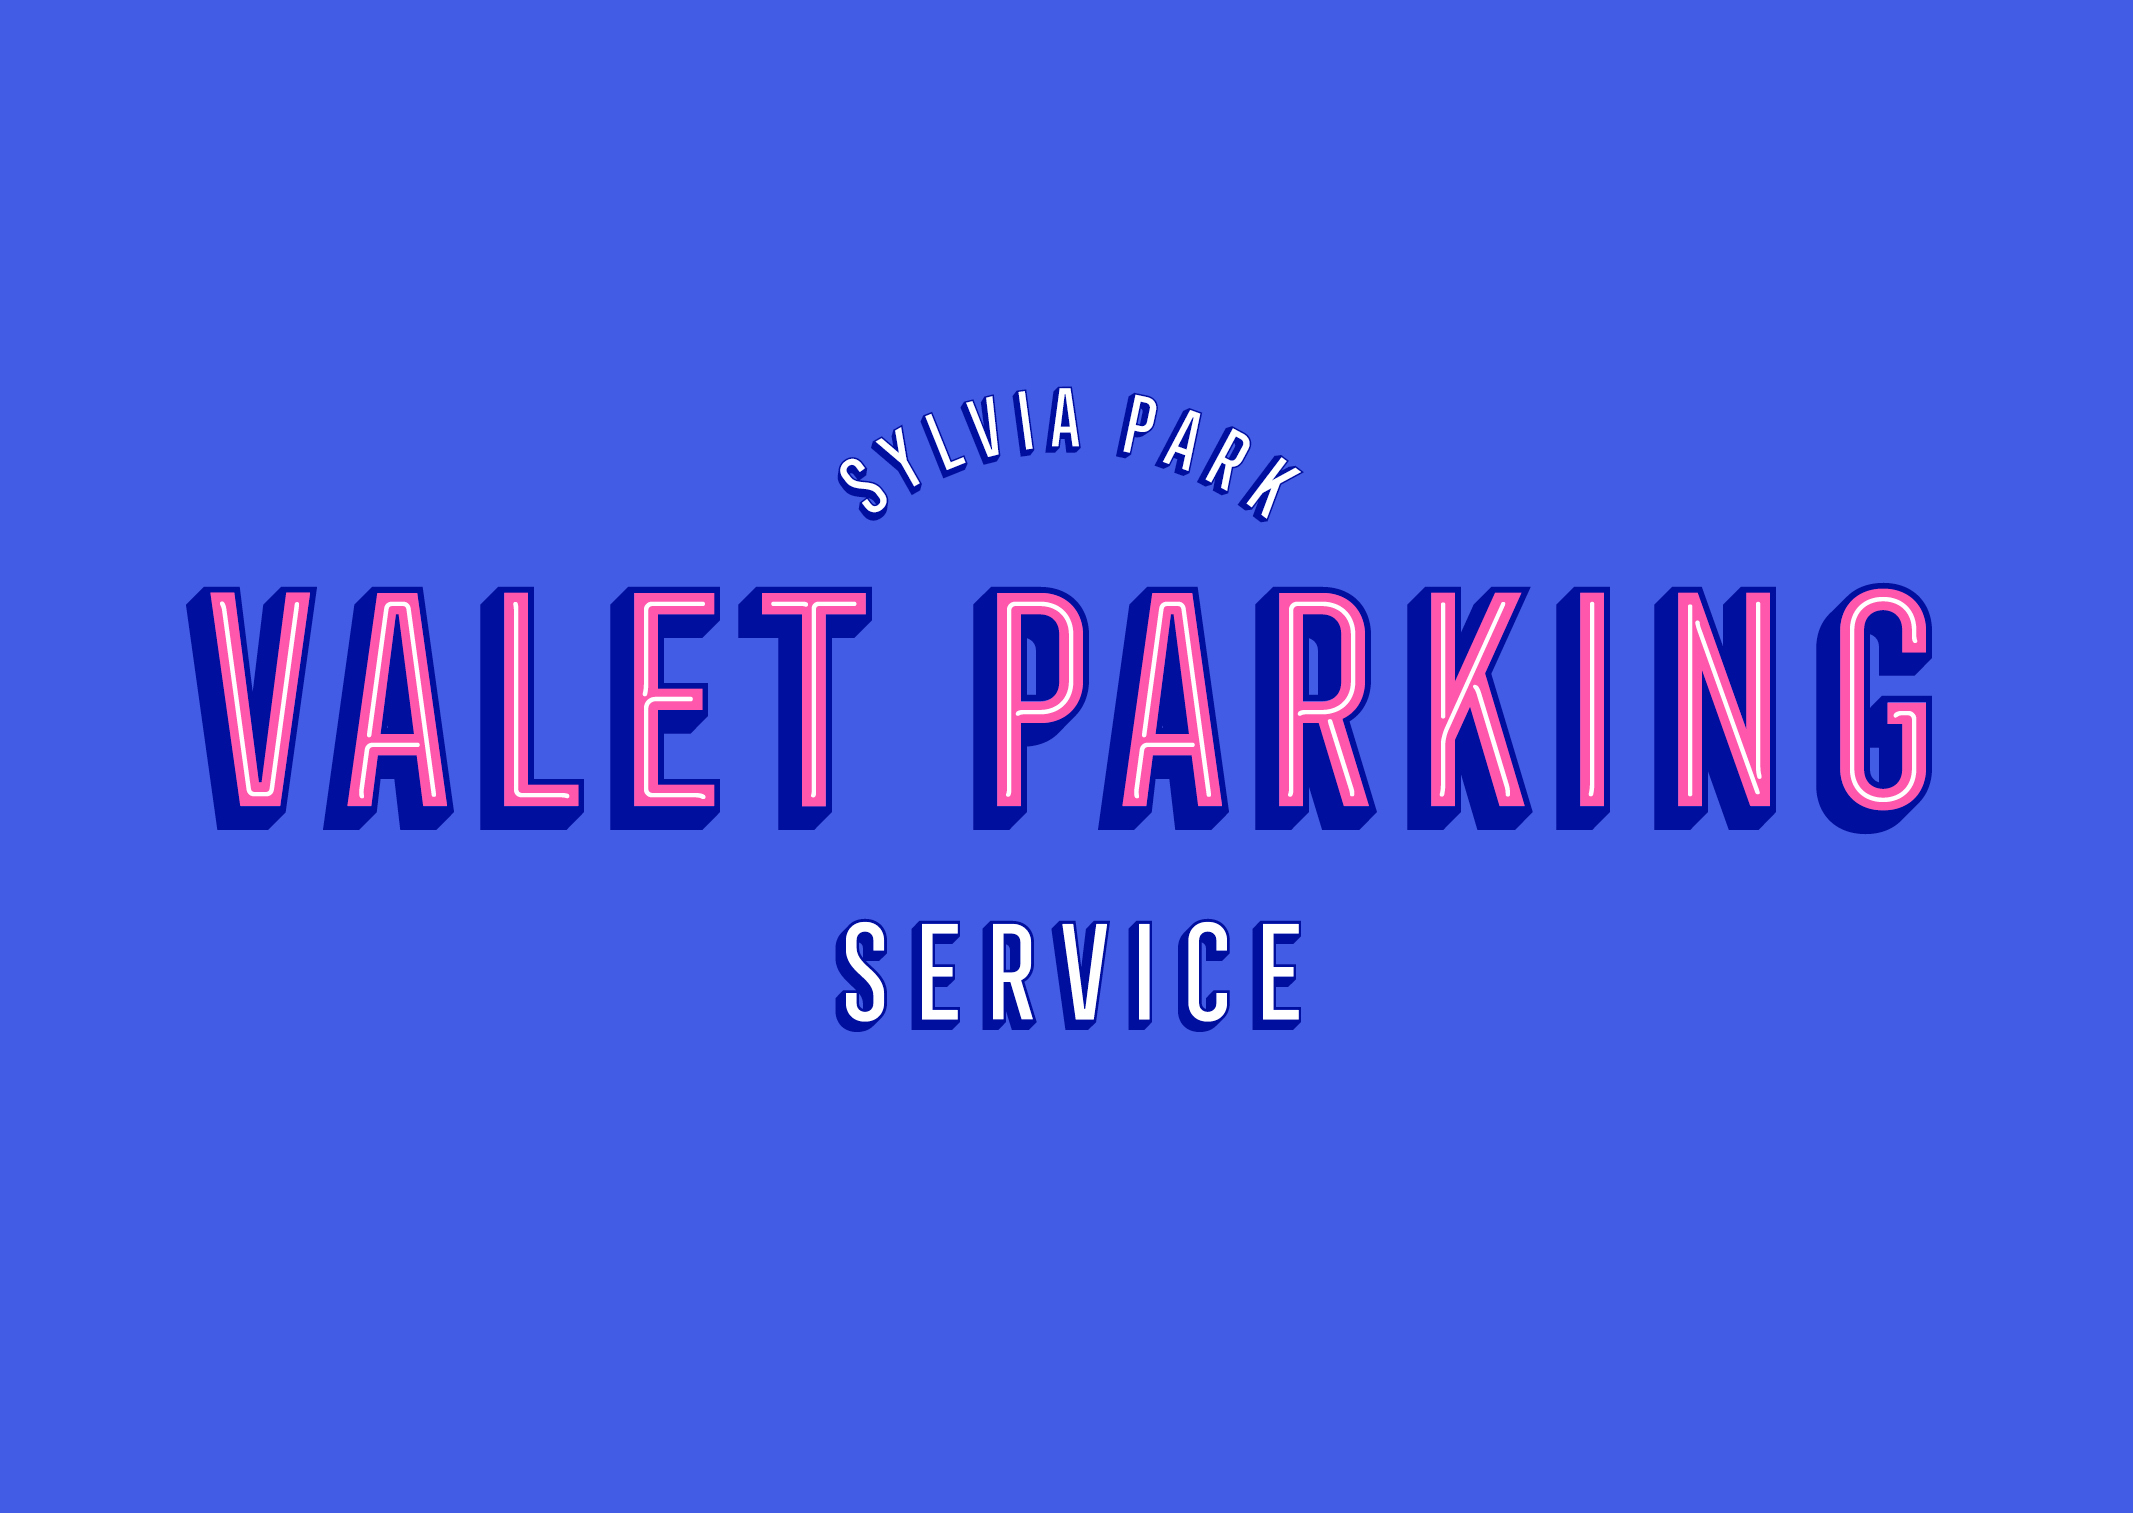 Retro themed identity for Sylvia Park Valet Parking Experience featuring Neon style lettering